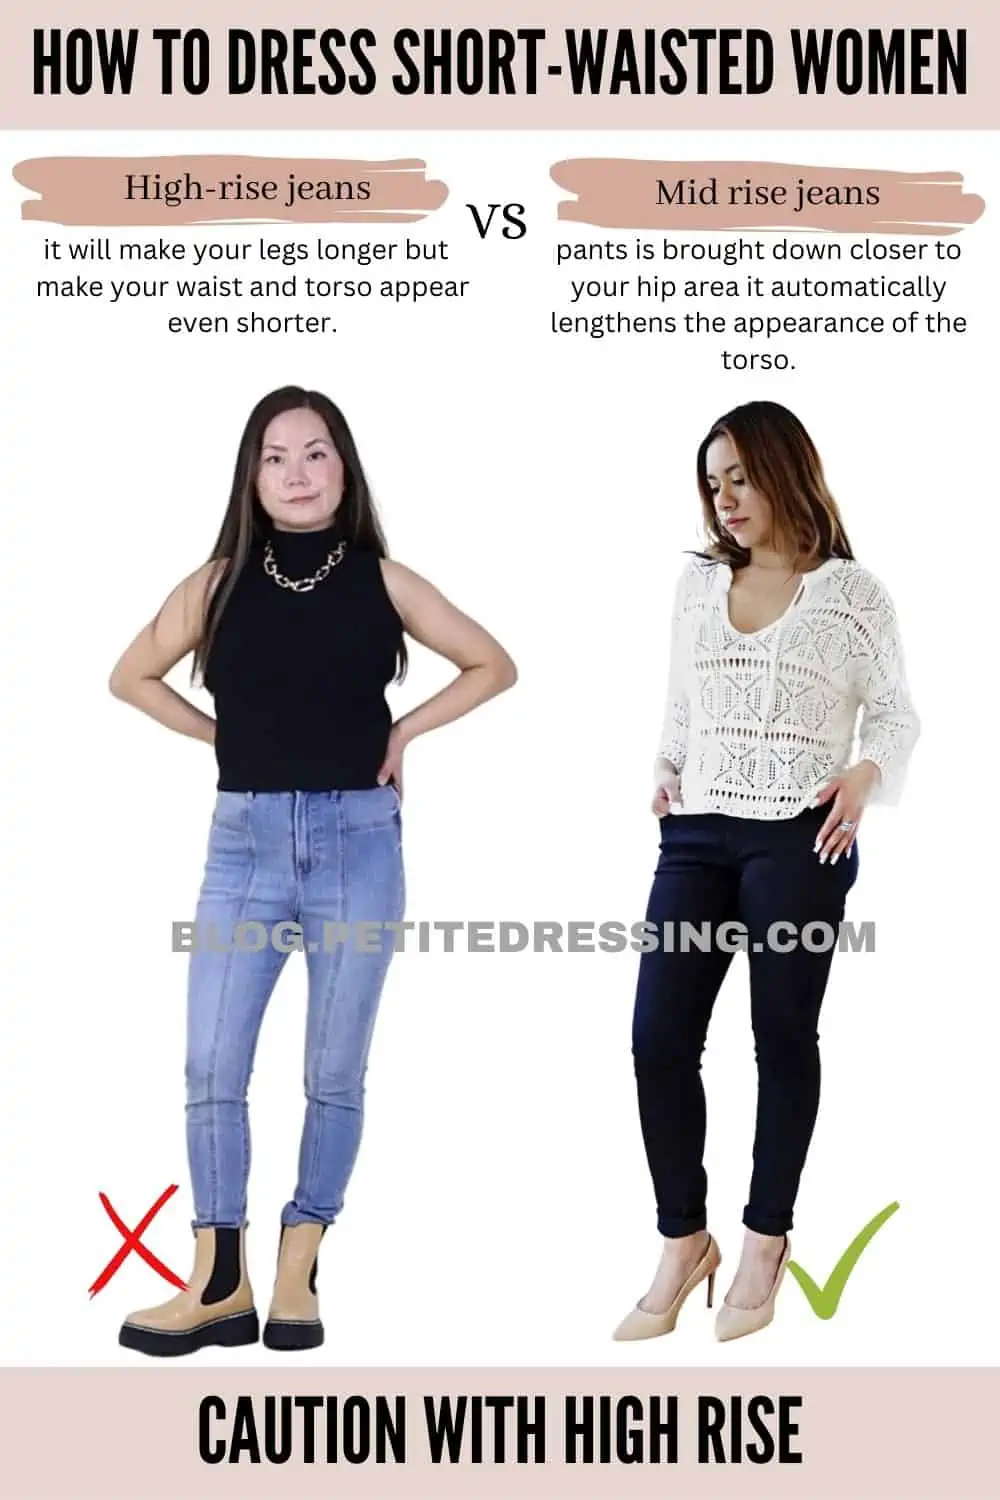 The Complete Styling Guide for Short Waisted Women - Petite